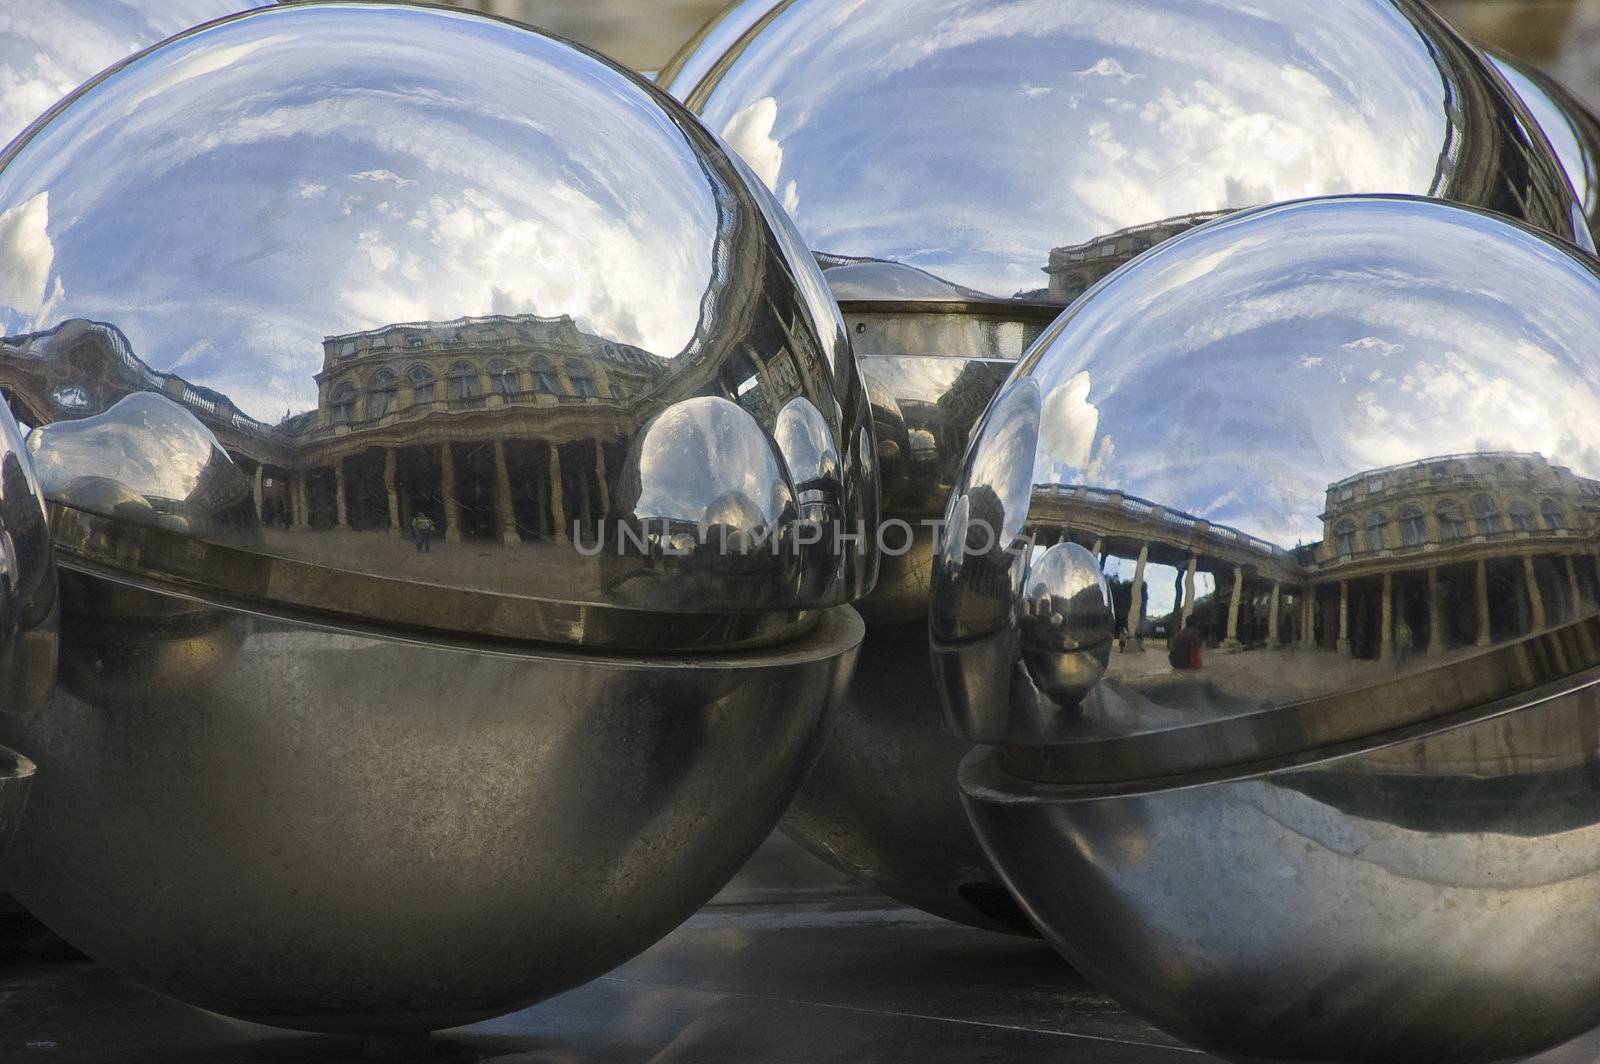 Reflecting Spheres by ralarcon